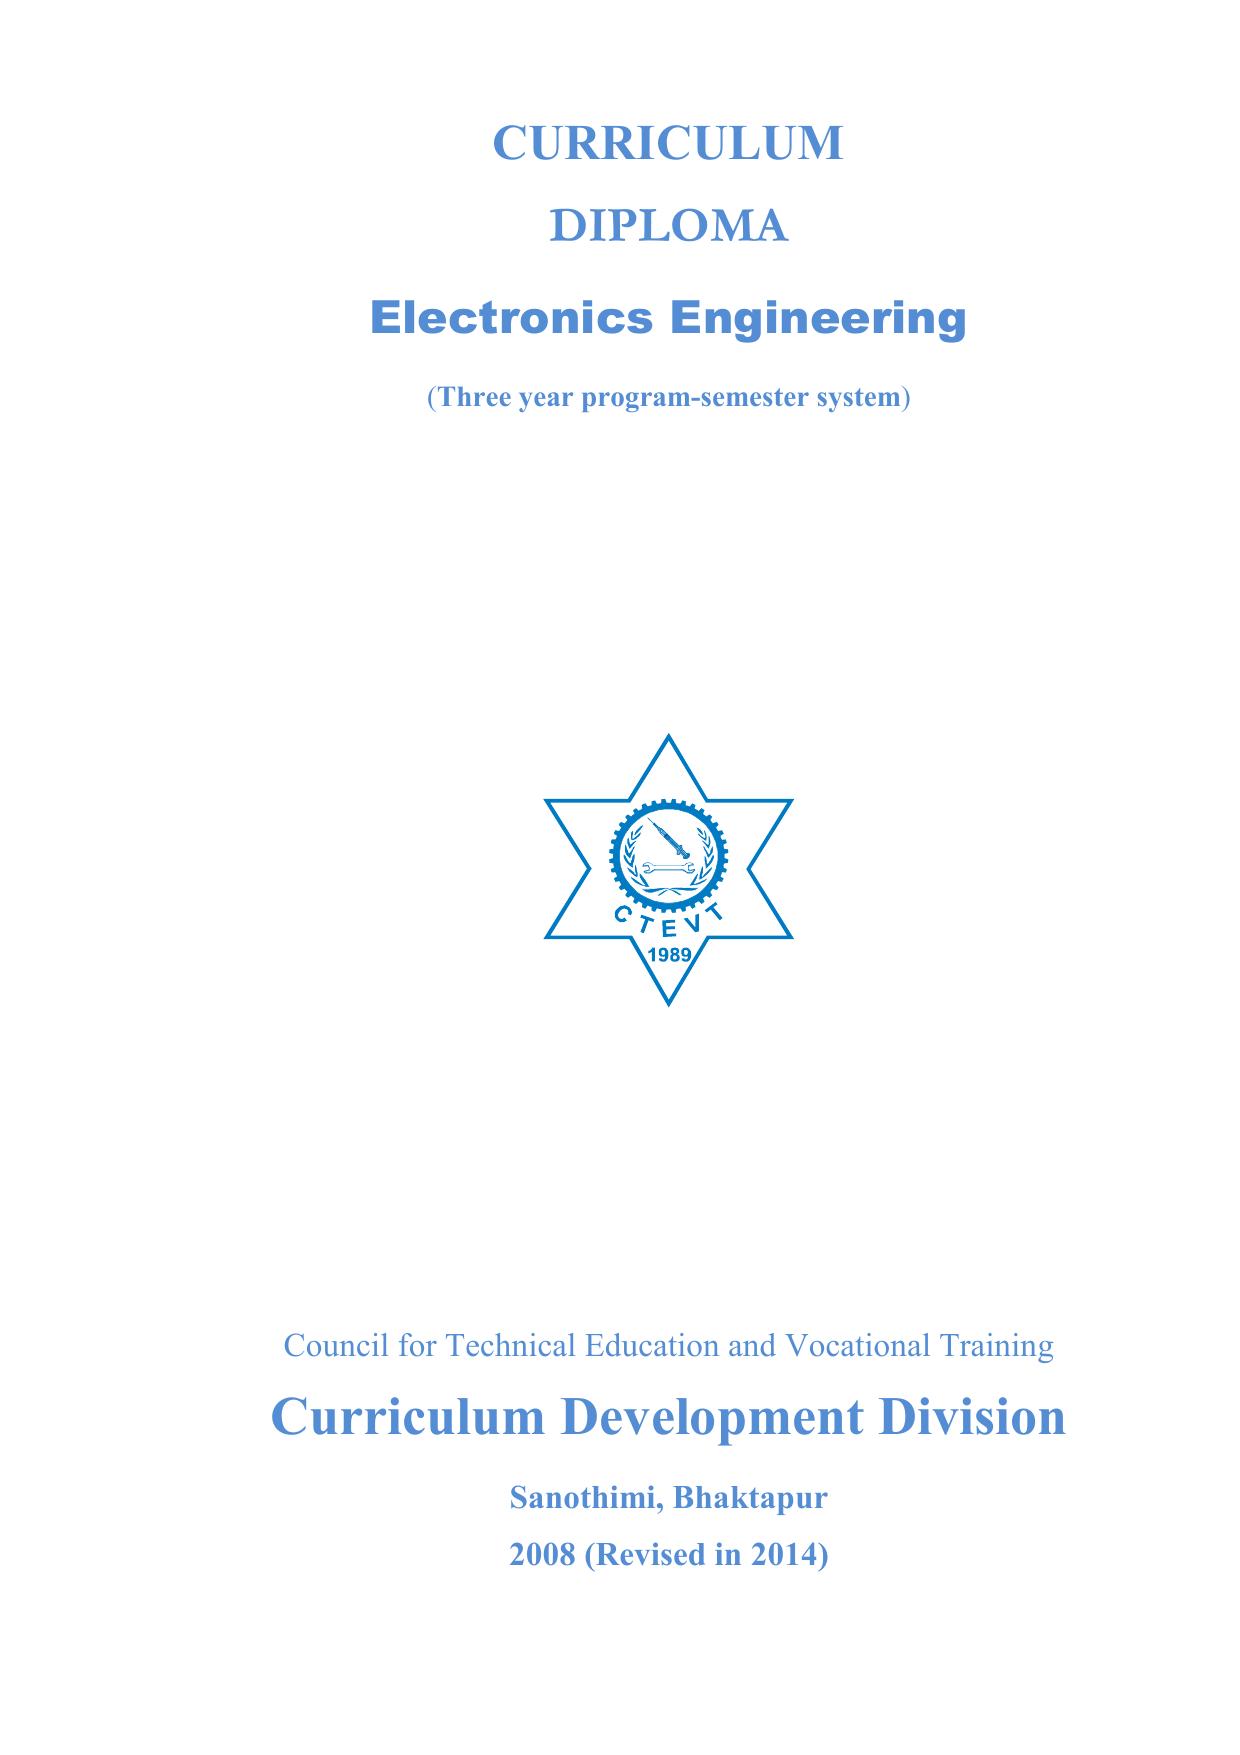 Diploma in Electronics Engineering, 2014